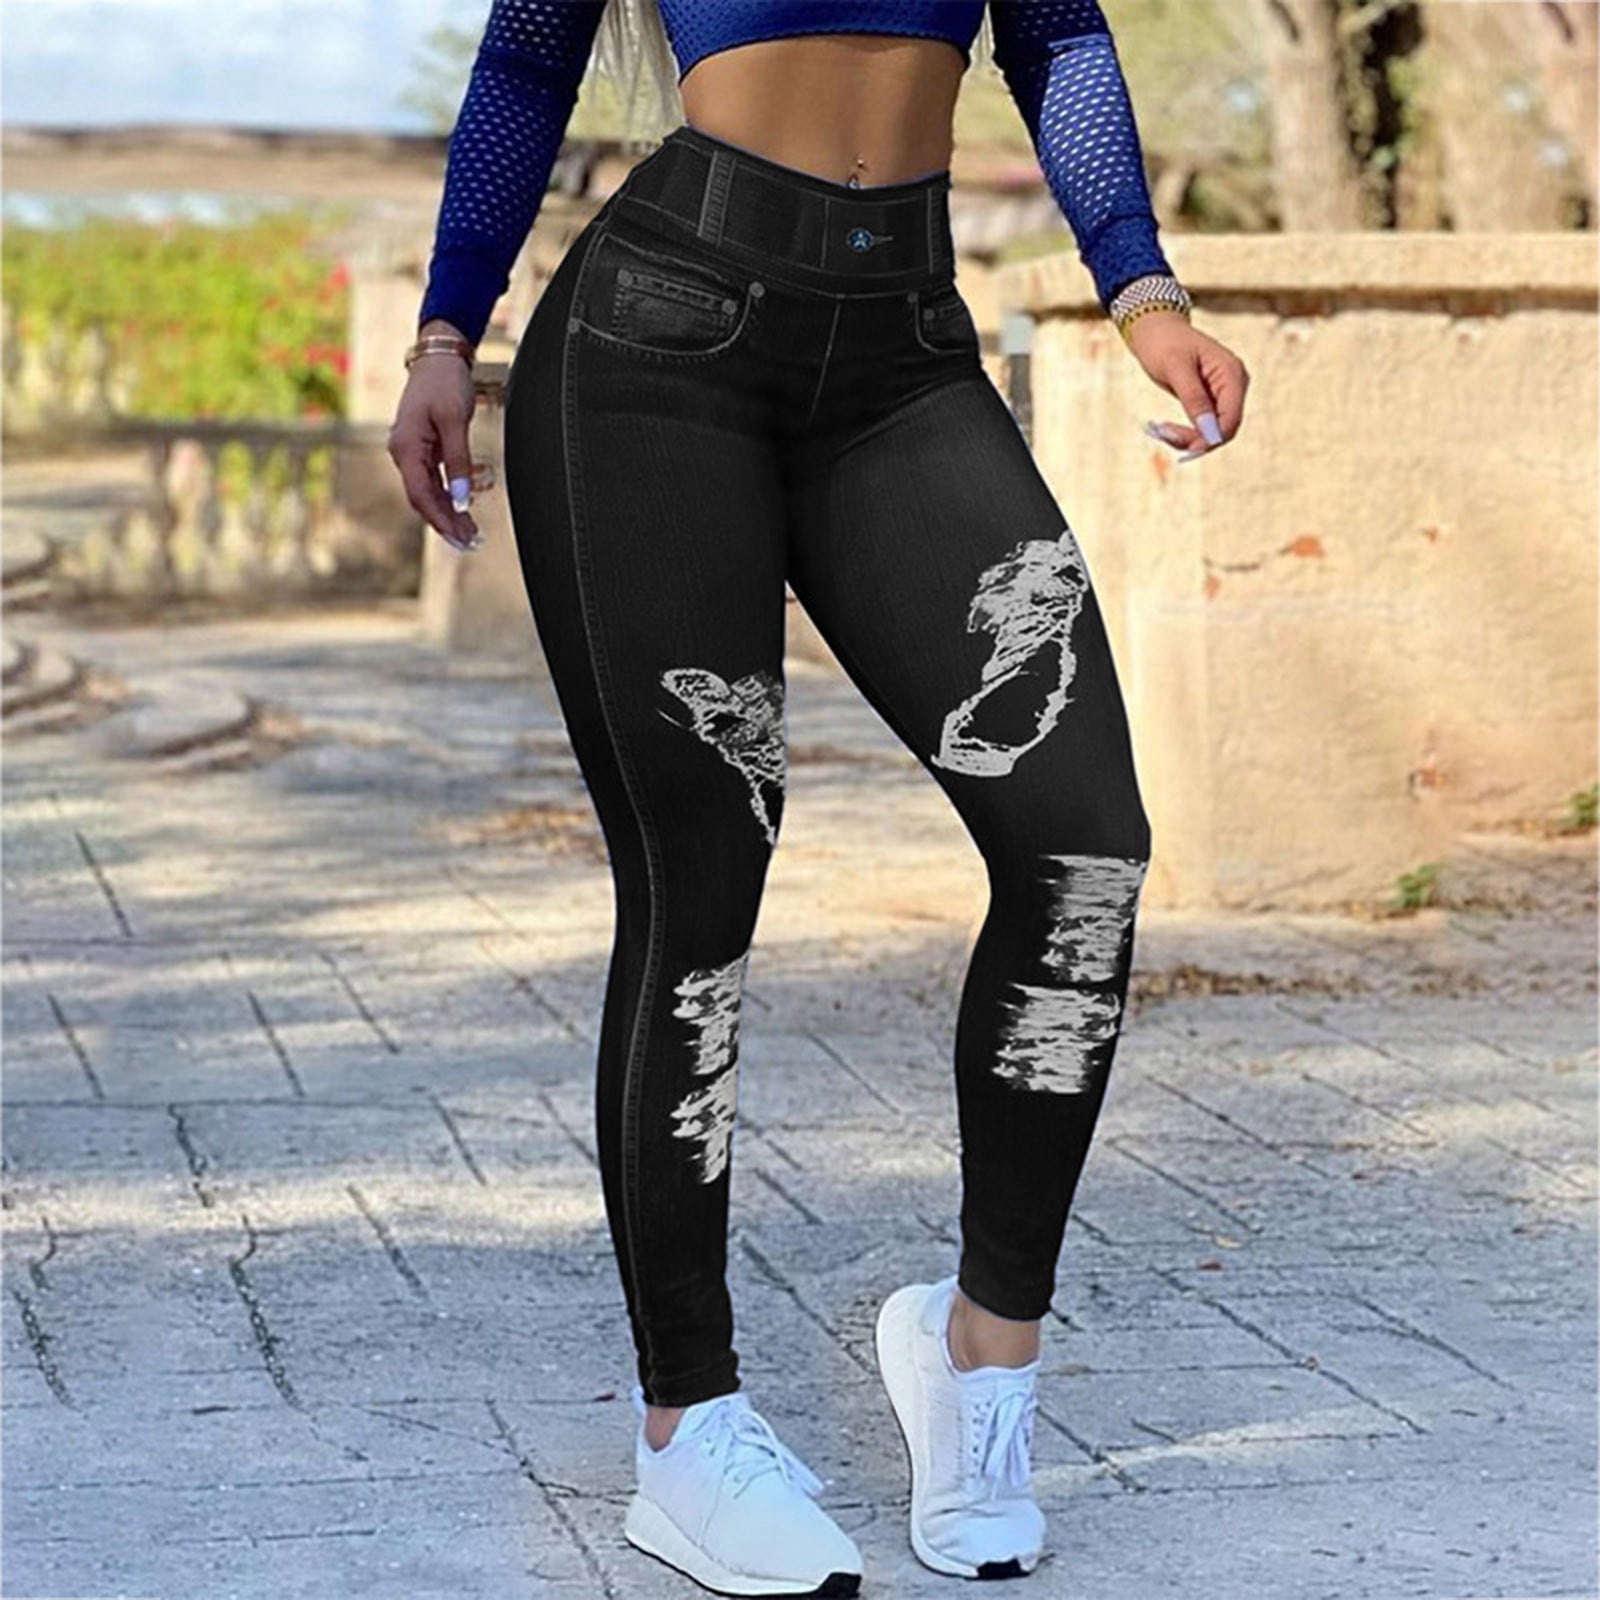 Buy NEW YOUNG Leggings with Pockets for Women,High Waisted Tummy Control  Workout Yoga Pants 3 Pack, 3 Pack-black/Black/Black, Large-X-Large at